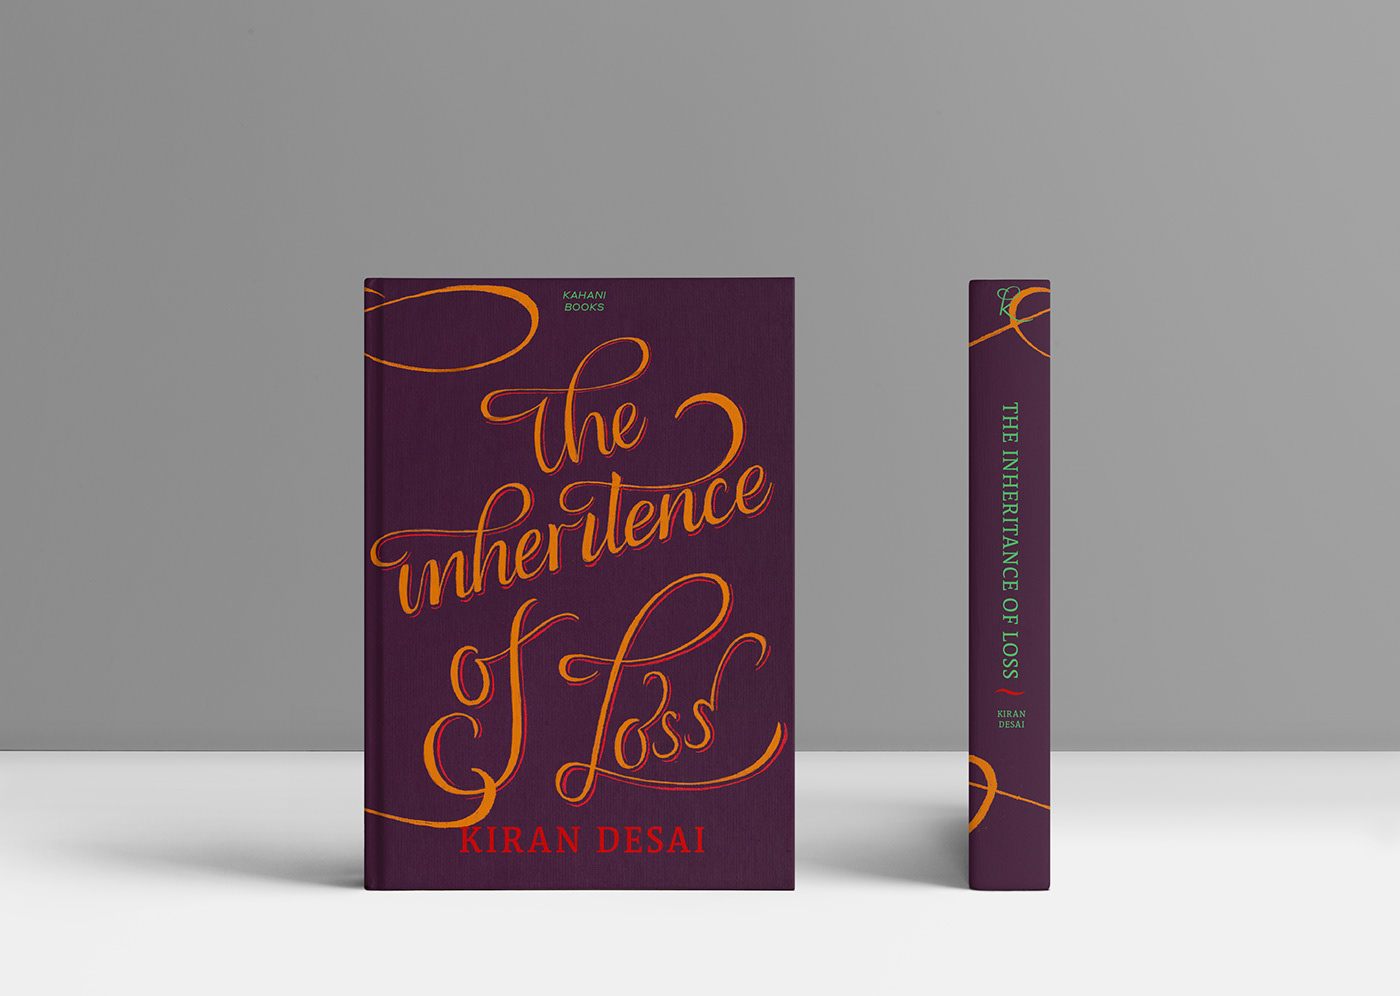 Book Cover Design publication house lettering book covers branding 